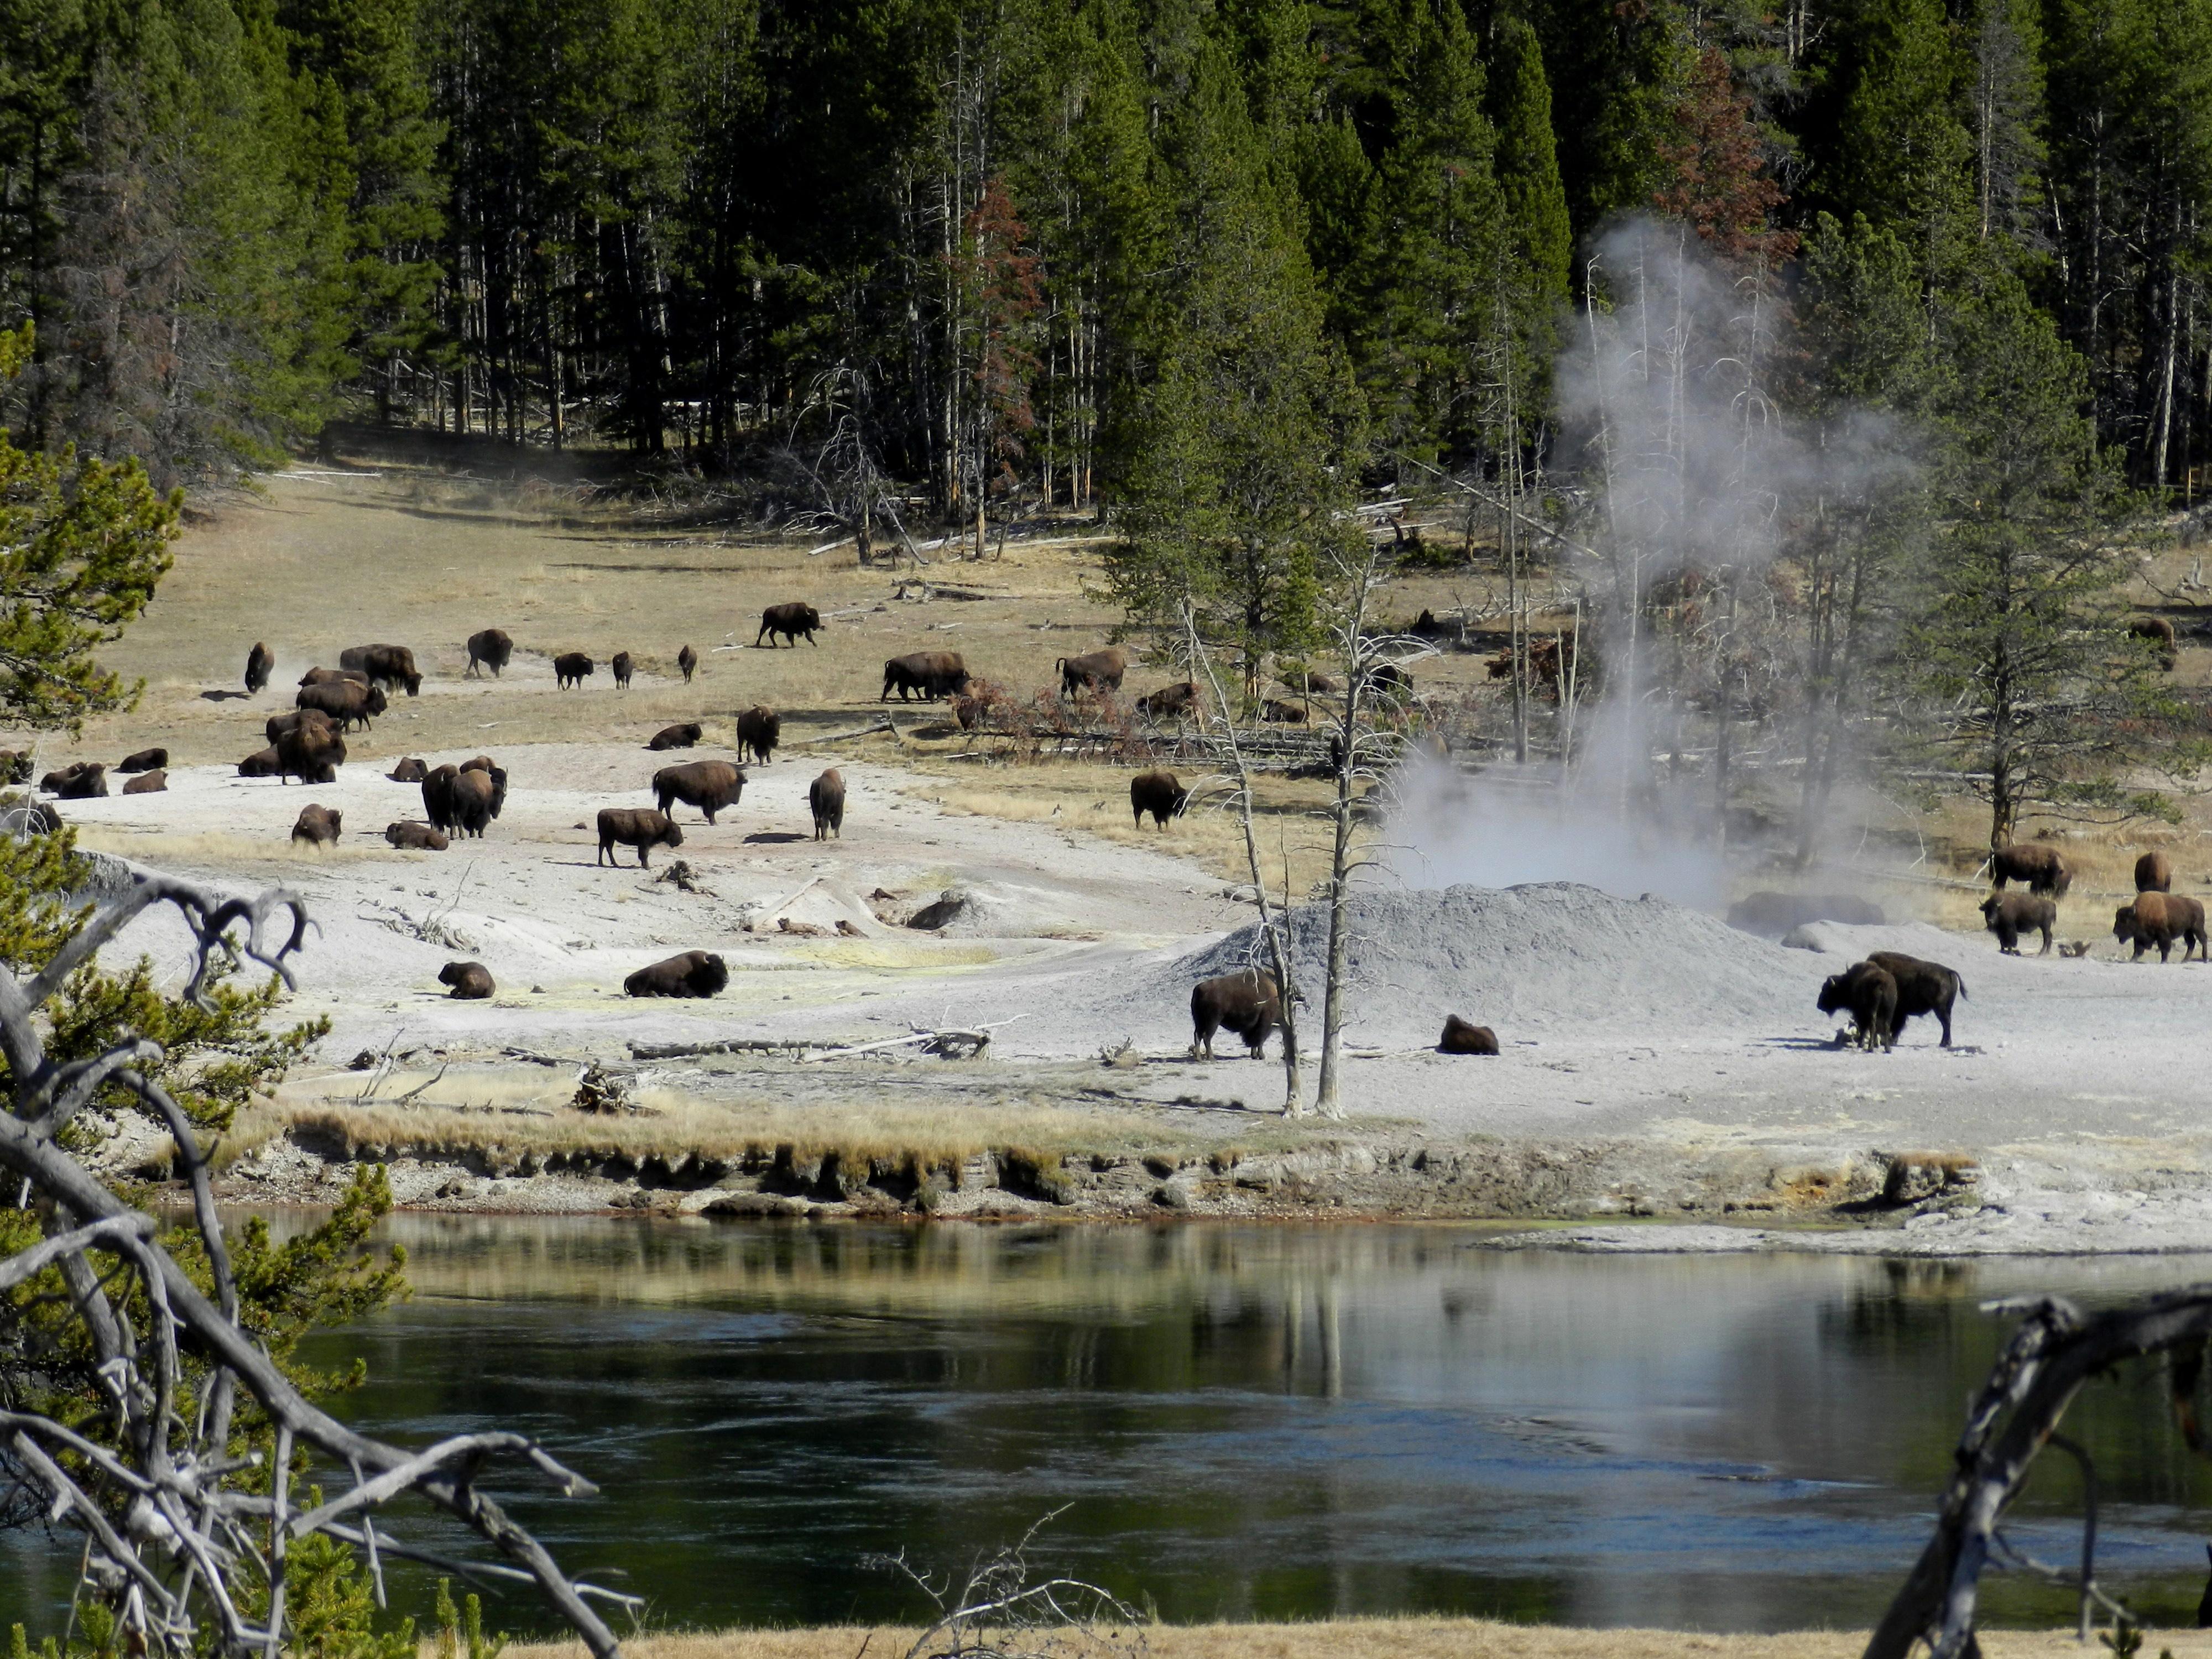 A herd of bison grazing through a barren and steaming thermal area.